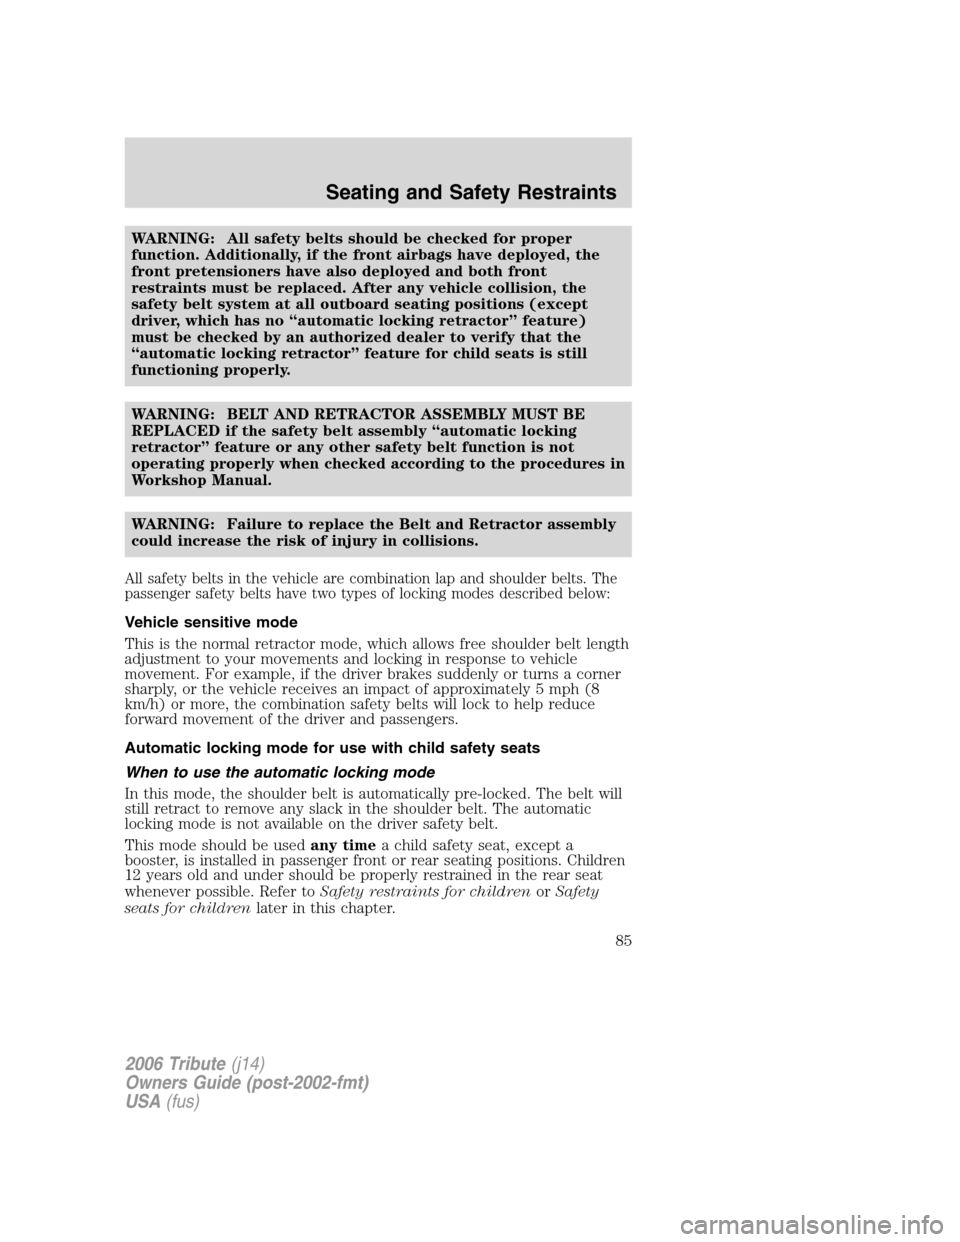 MAZDA MODEL TRIBUTE 2006  Owners Manual (in English) WARNING: All safety belts should be checked for proper
function. Additionally, if the front airbags have deployed, the
front pretensioners have also deployed and both front
restraints must be replaced